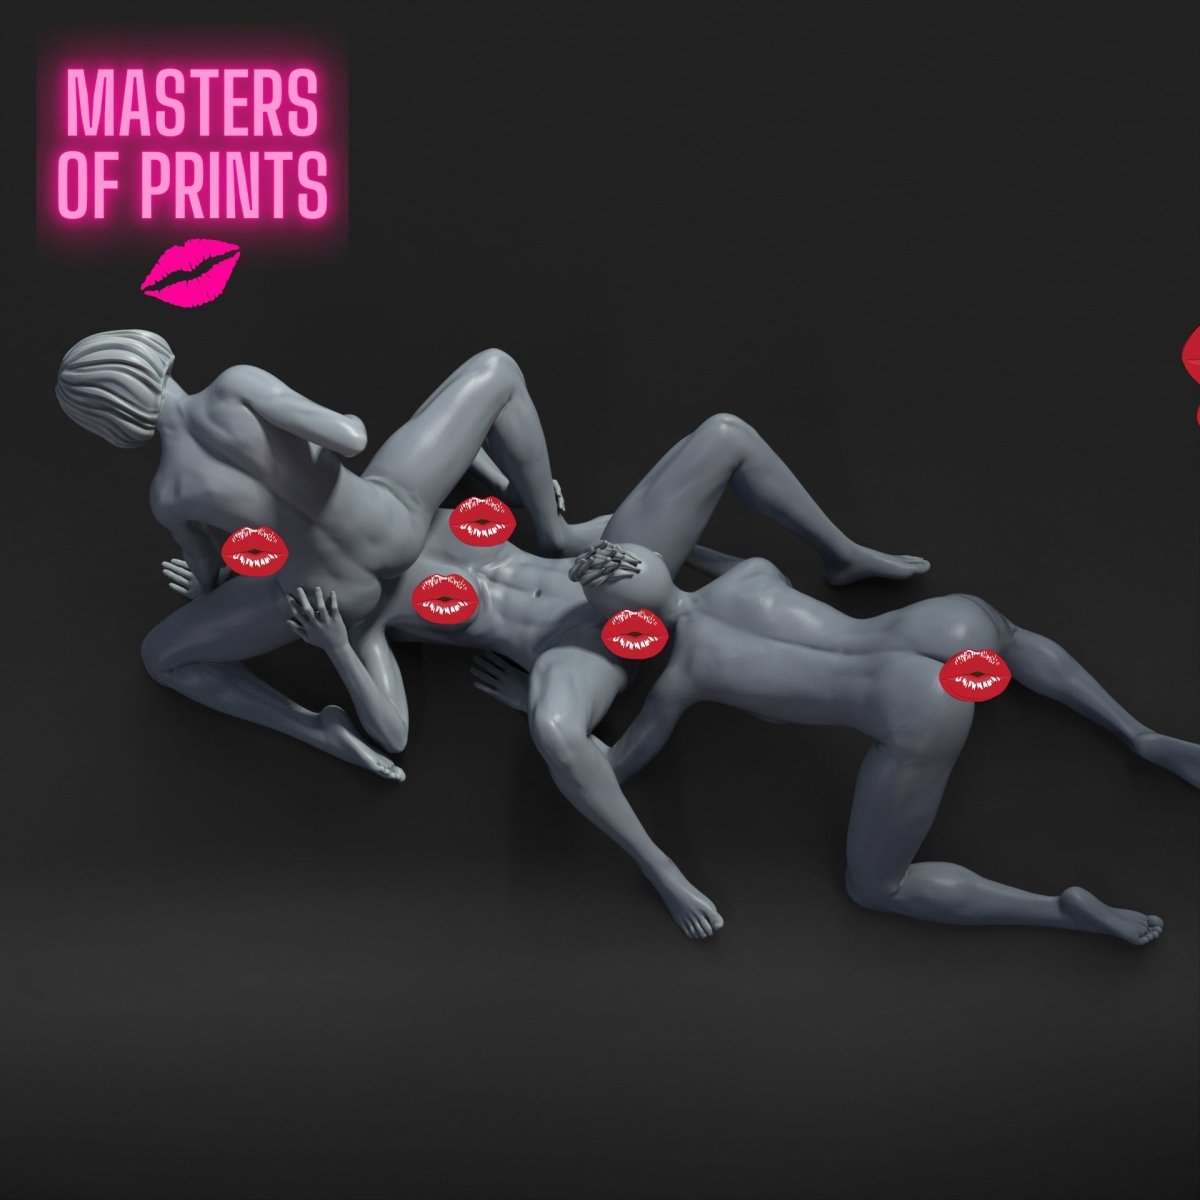 3some 534 Mature 3d Printed miniature FanArt by Masters Of Prints Collectables Statues & Figurines